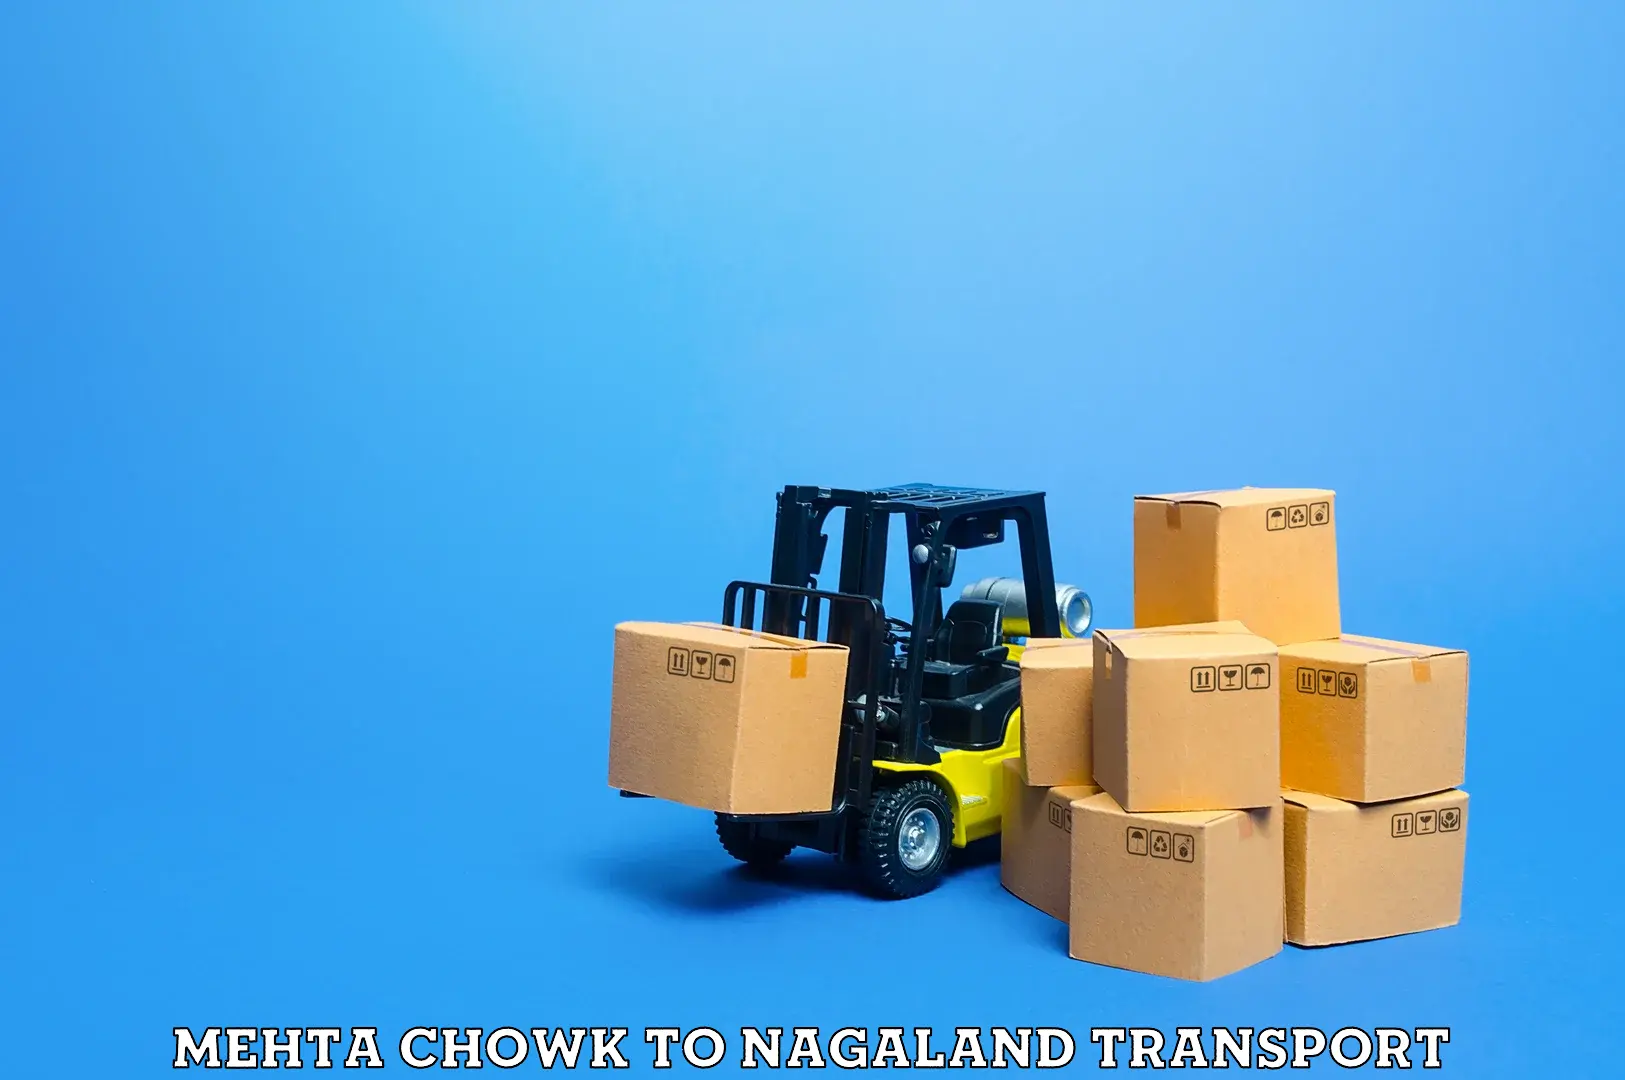 Truck transport companies in India Mehta Chowk to Nagaland